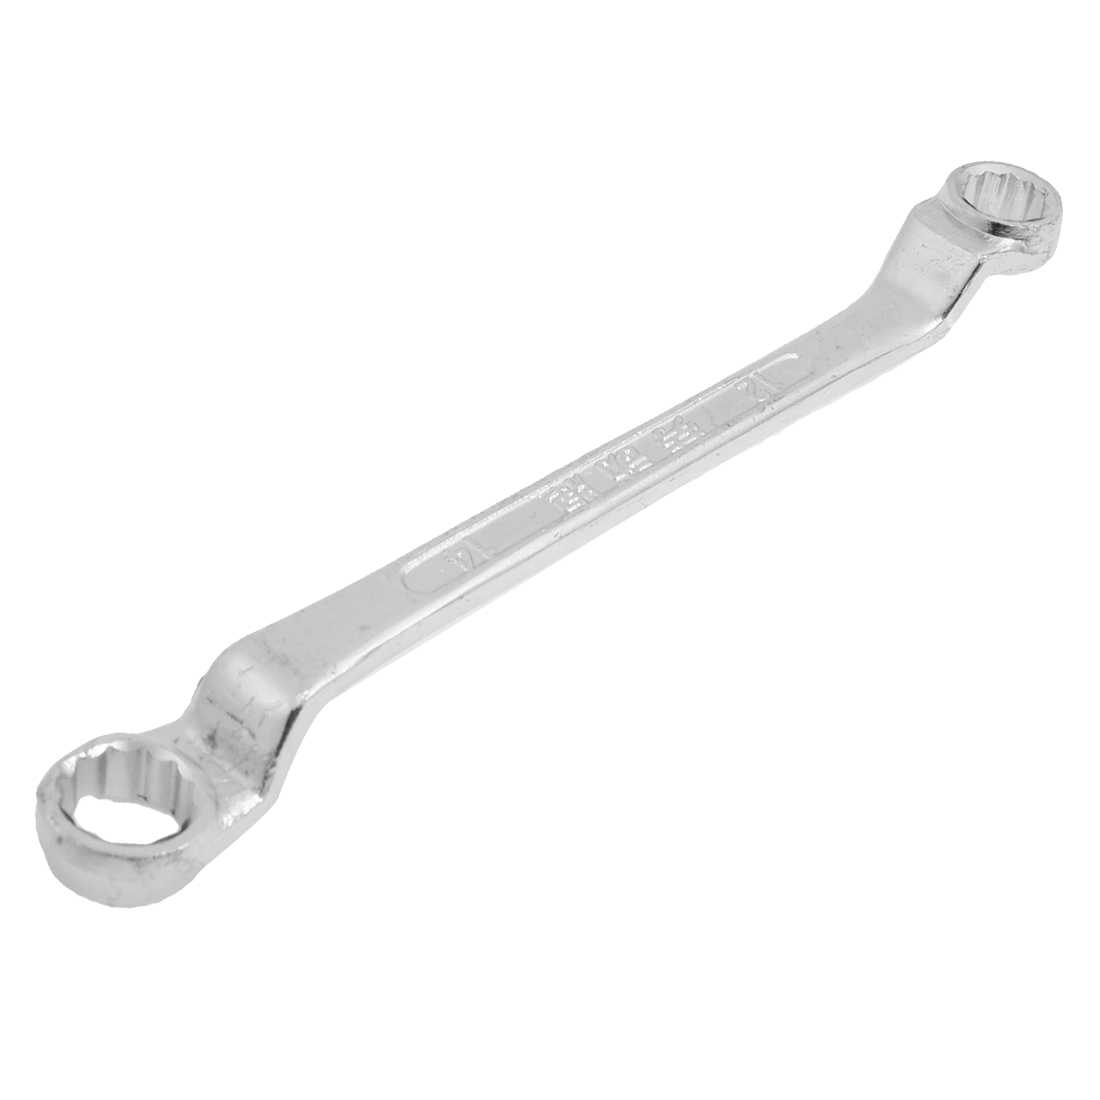 Unique Bargains Metric 12mm 14mm Double Ended Box End Wrench Spanner 185mm